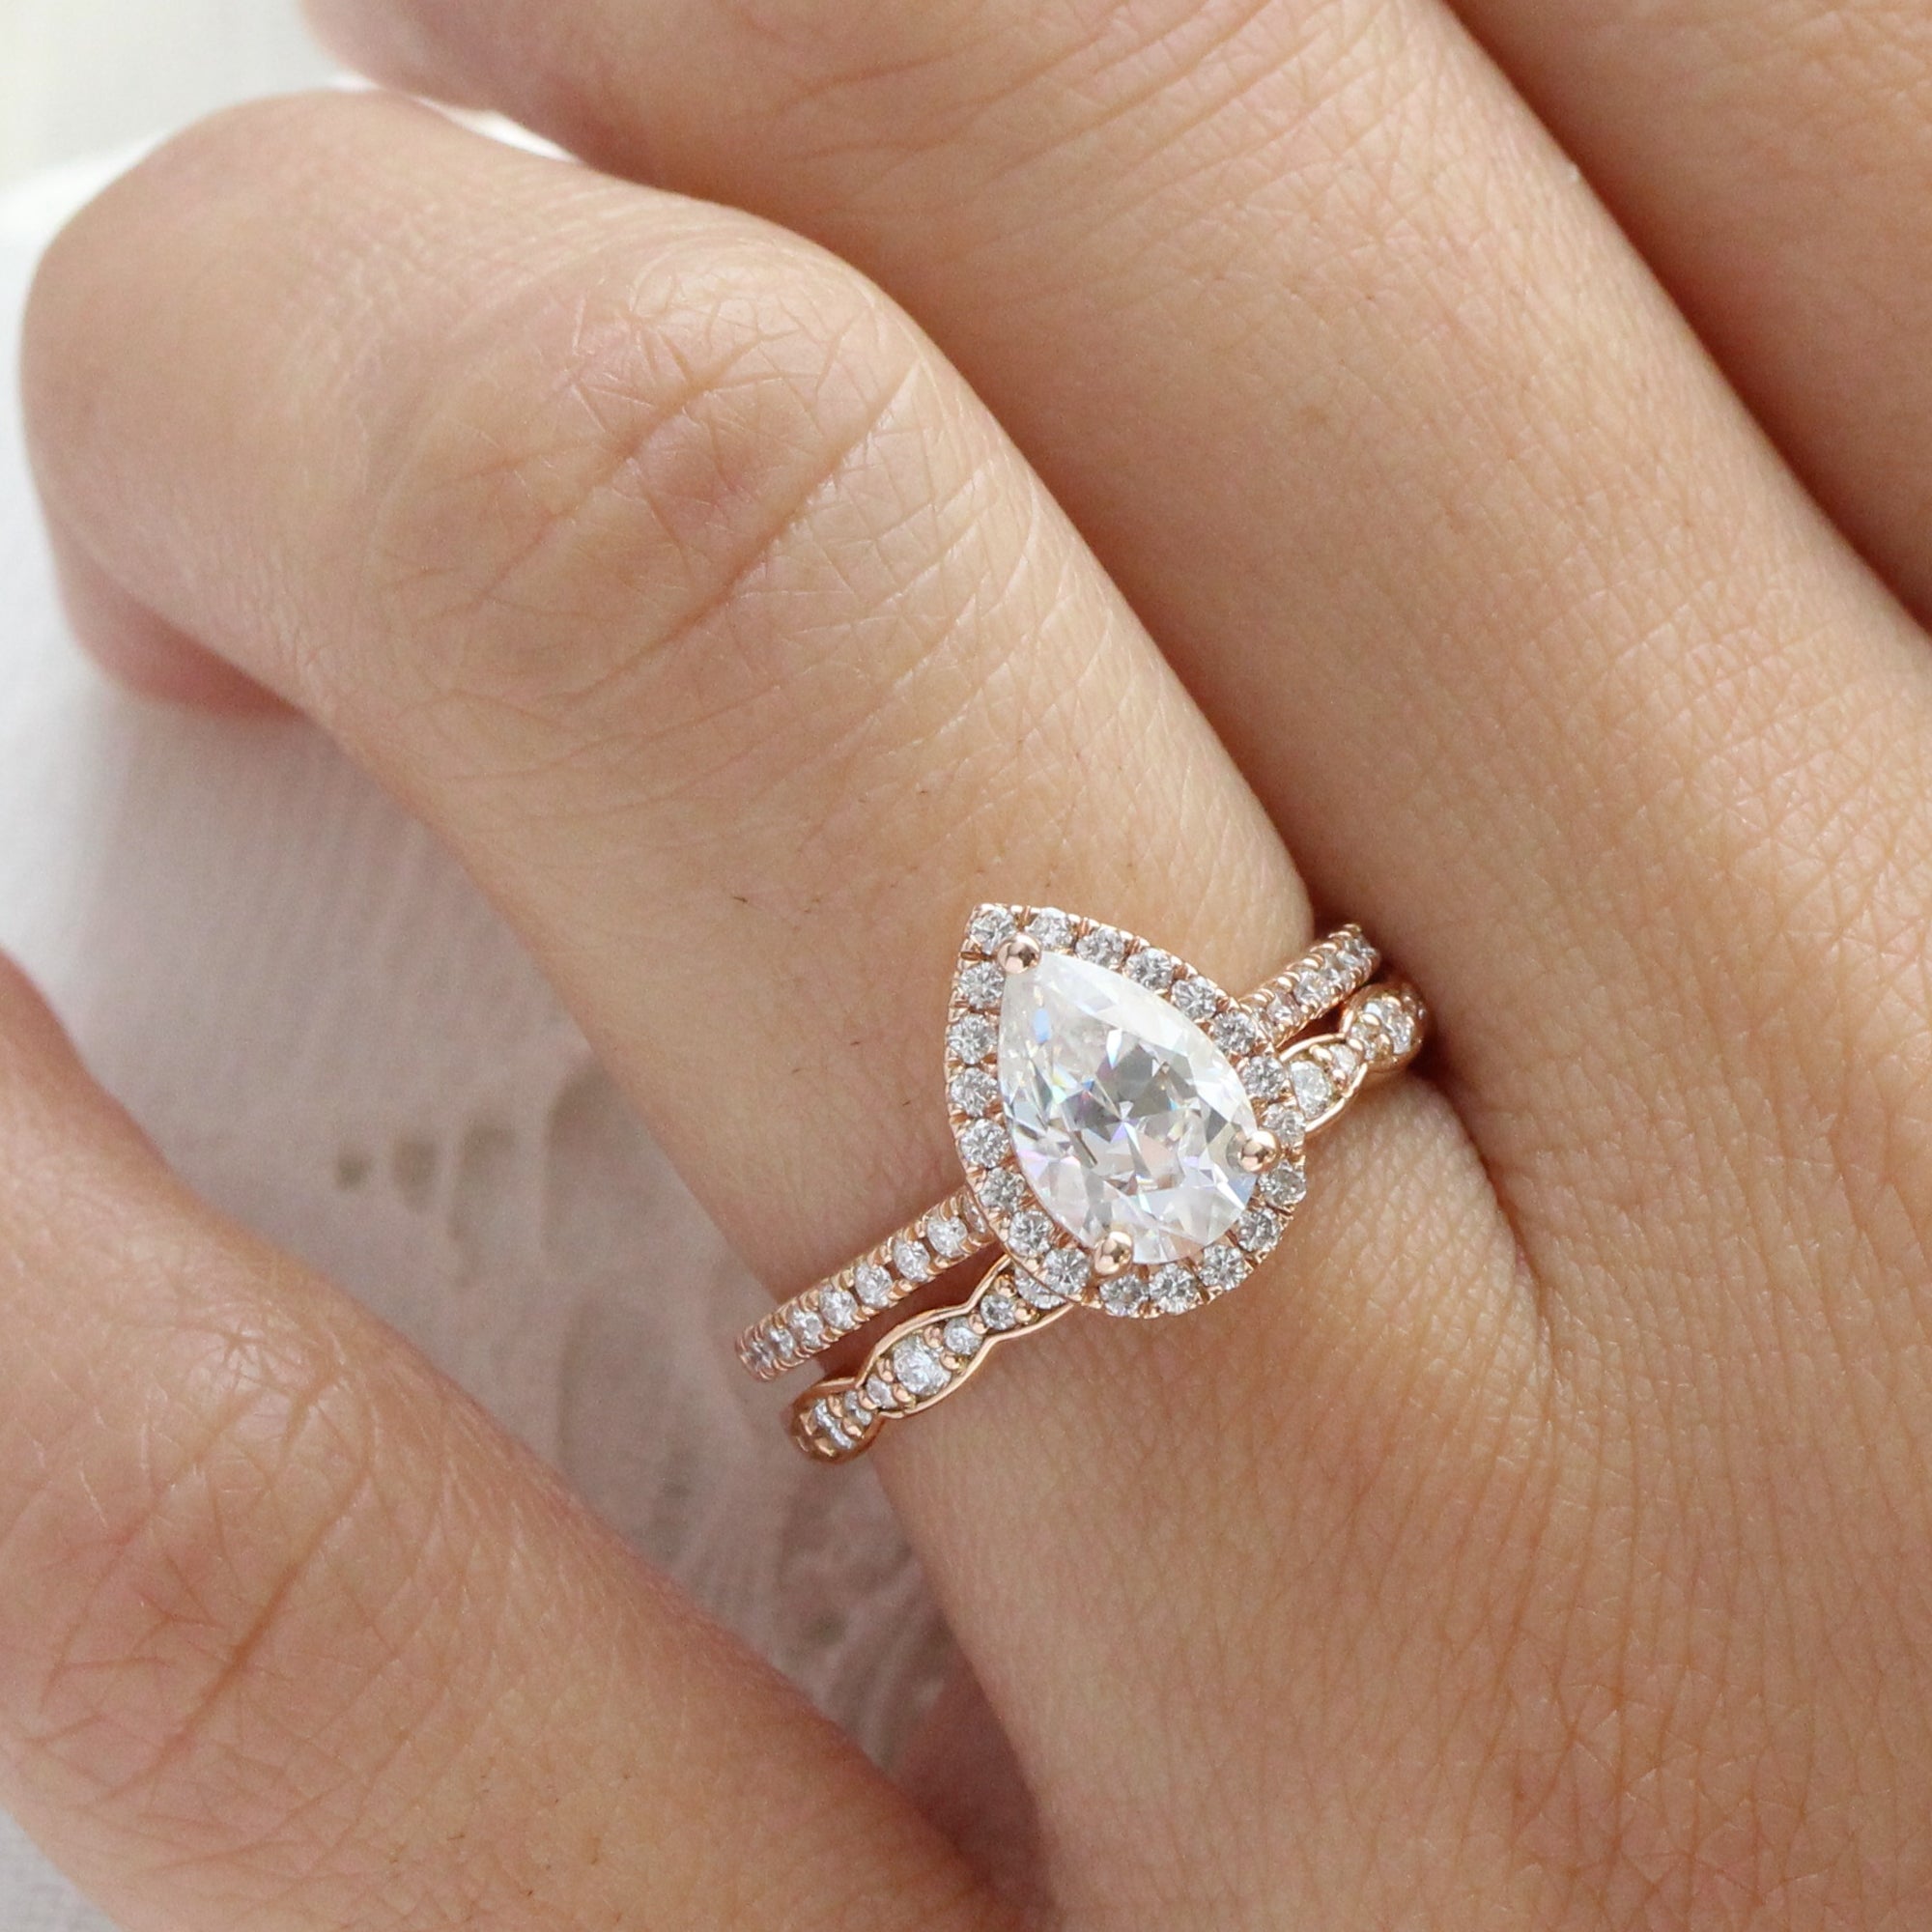 Pear Shaped Diamond Engagement Ring Set with Crown & Leaf Bands | Ken & Dana